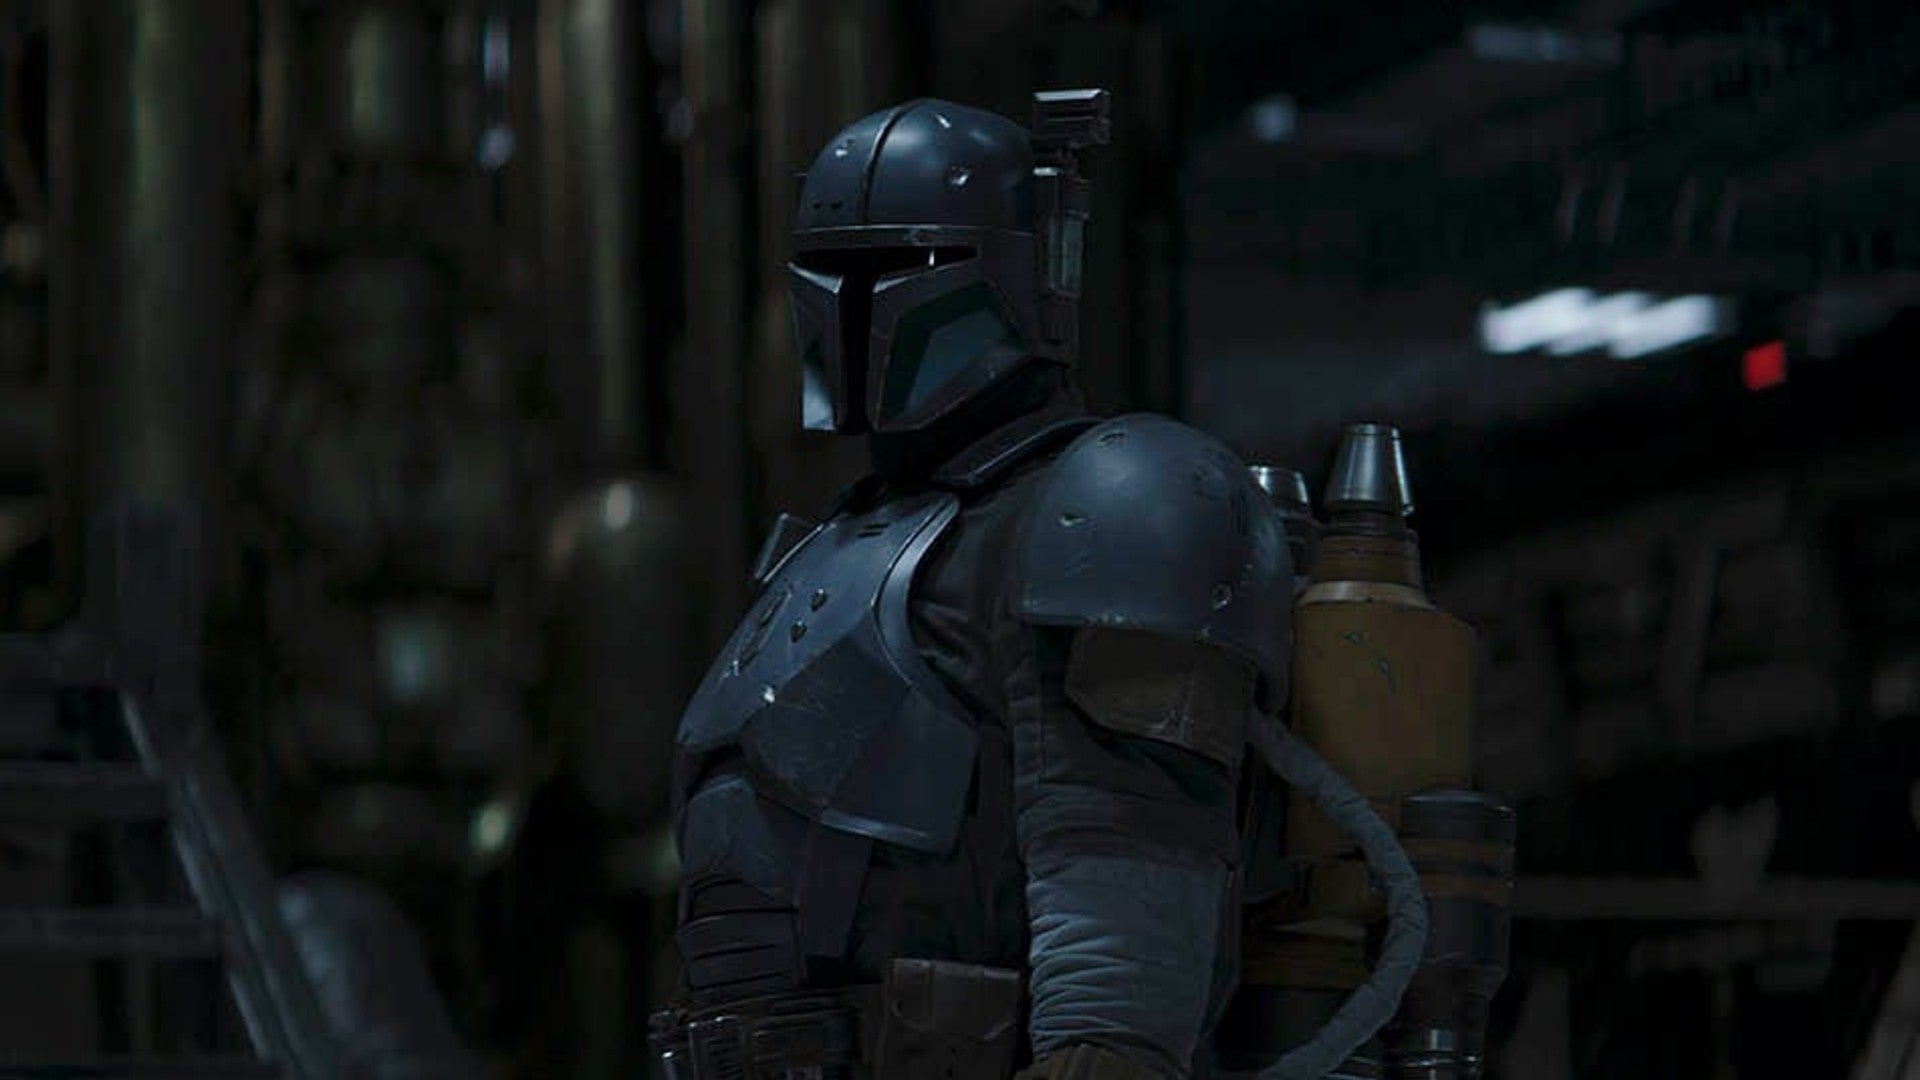 You'd never know that's Jon Favreau under there, because Paz Vizsla can't take his helmet off (Image: Disney / Lucasfilm)